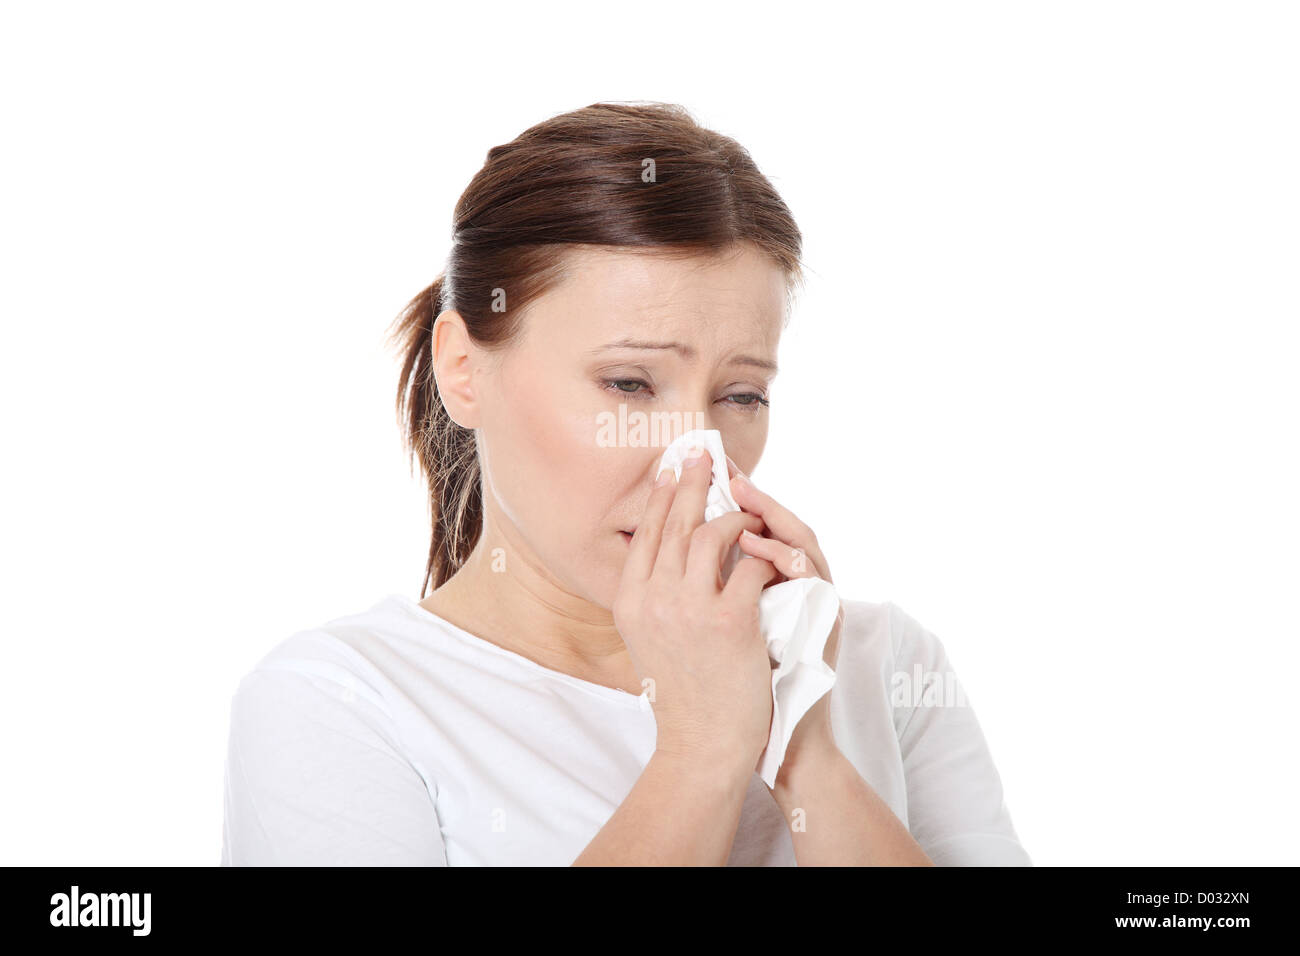 35-40 year old woman with tissue, heaving allergy or cold. Isolated on white background Stock Photo